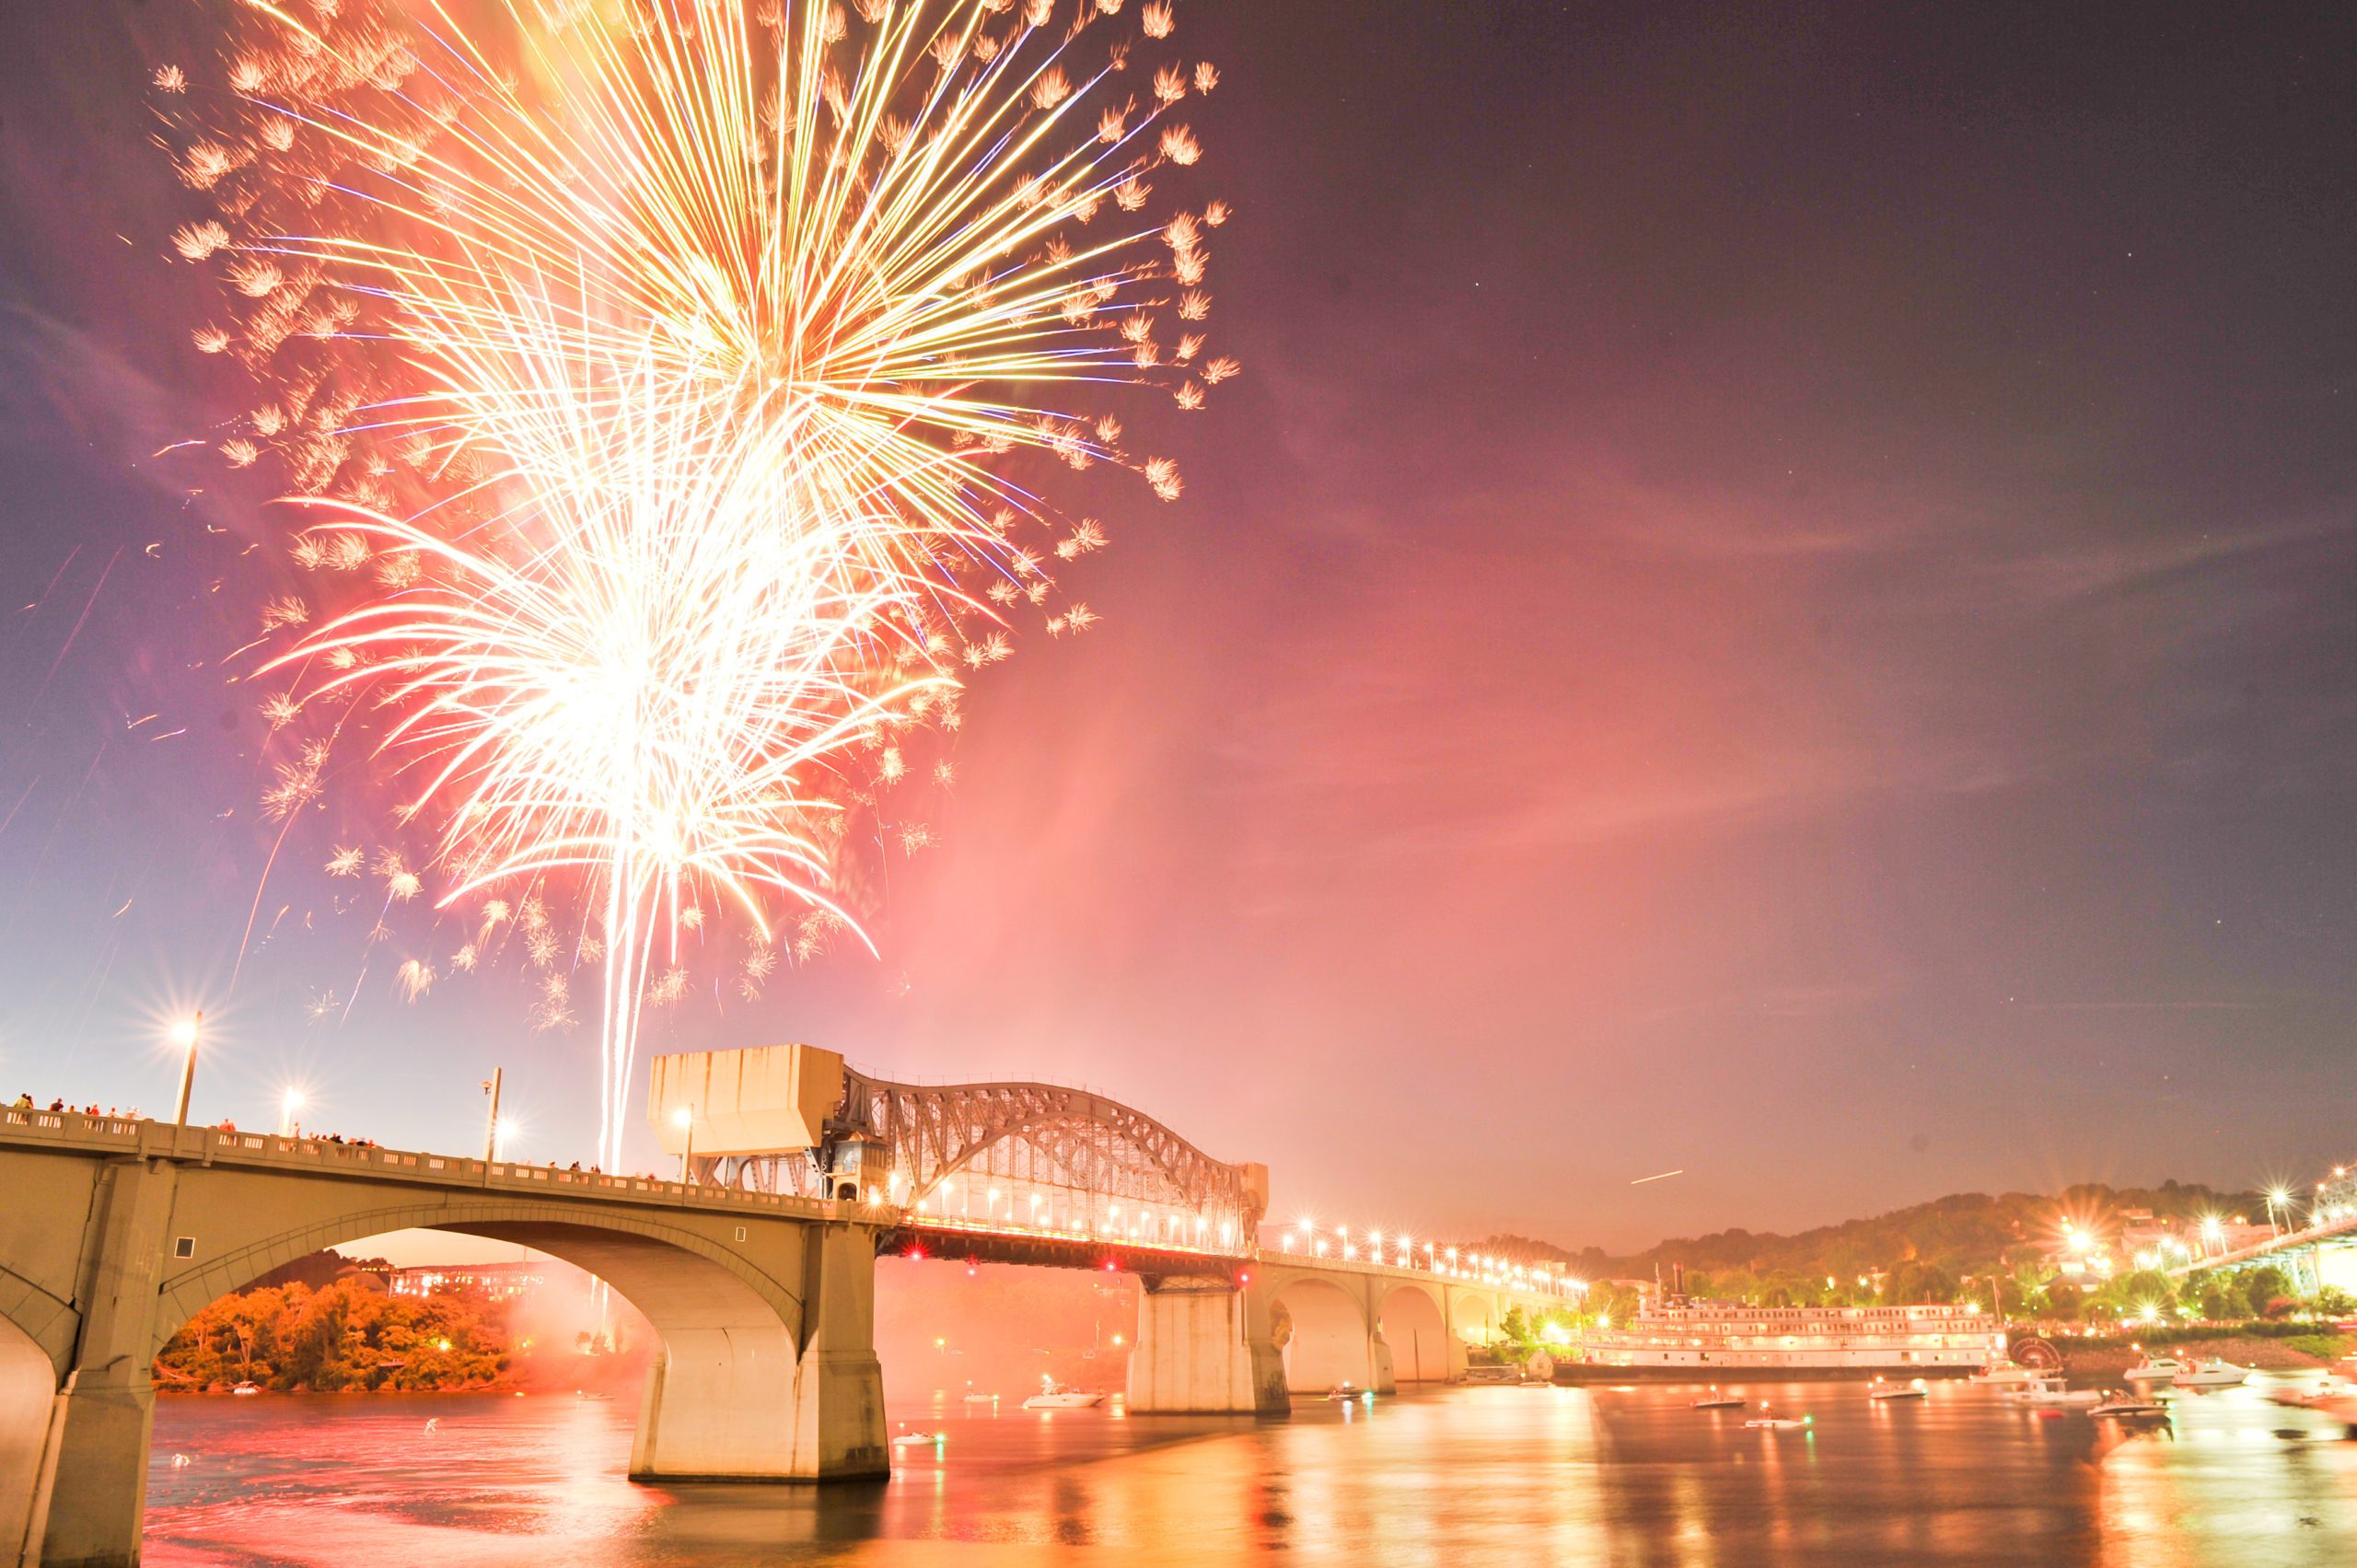 Celebrate New Year's Eve in Chattanooga Choose Chattanooga®